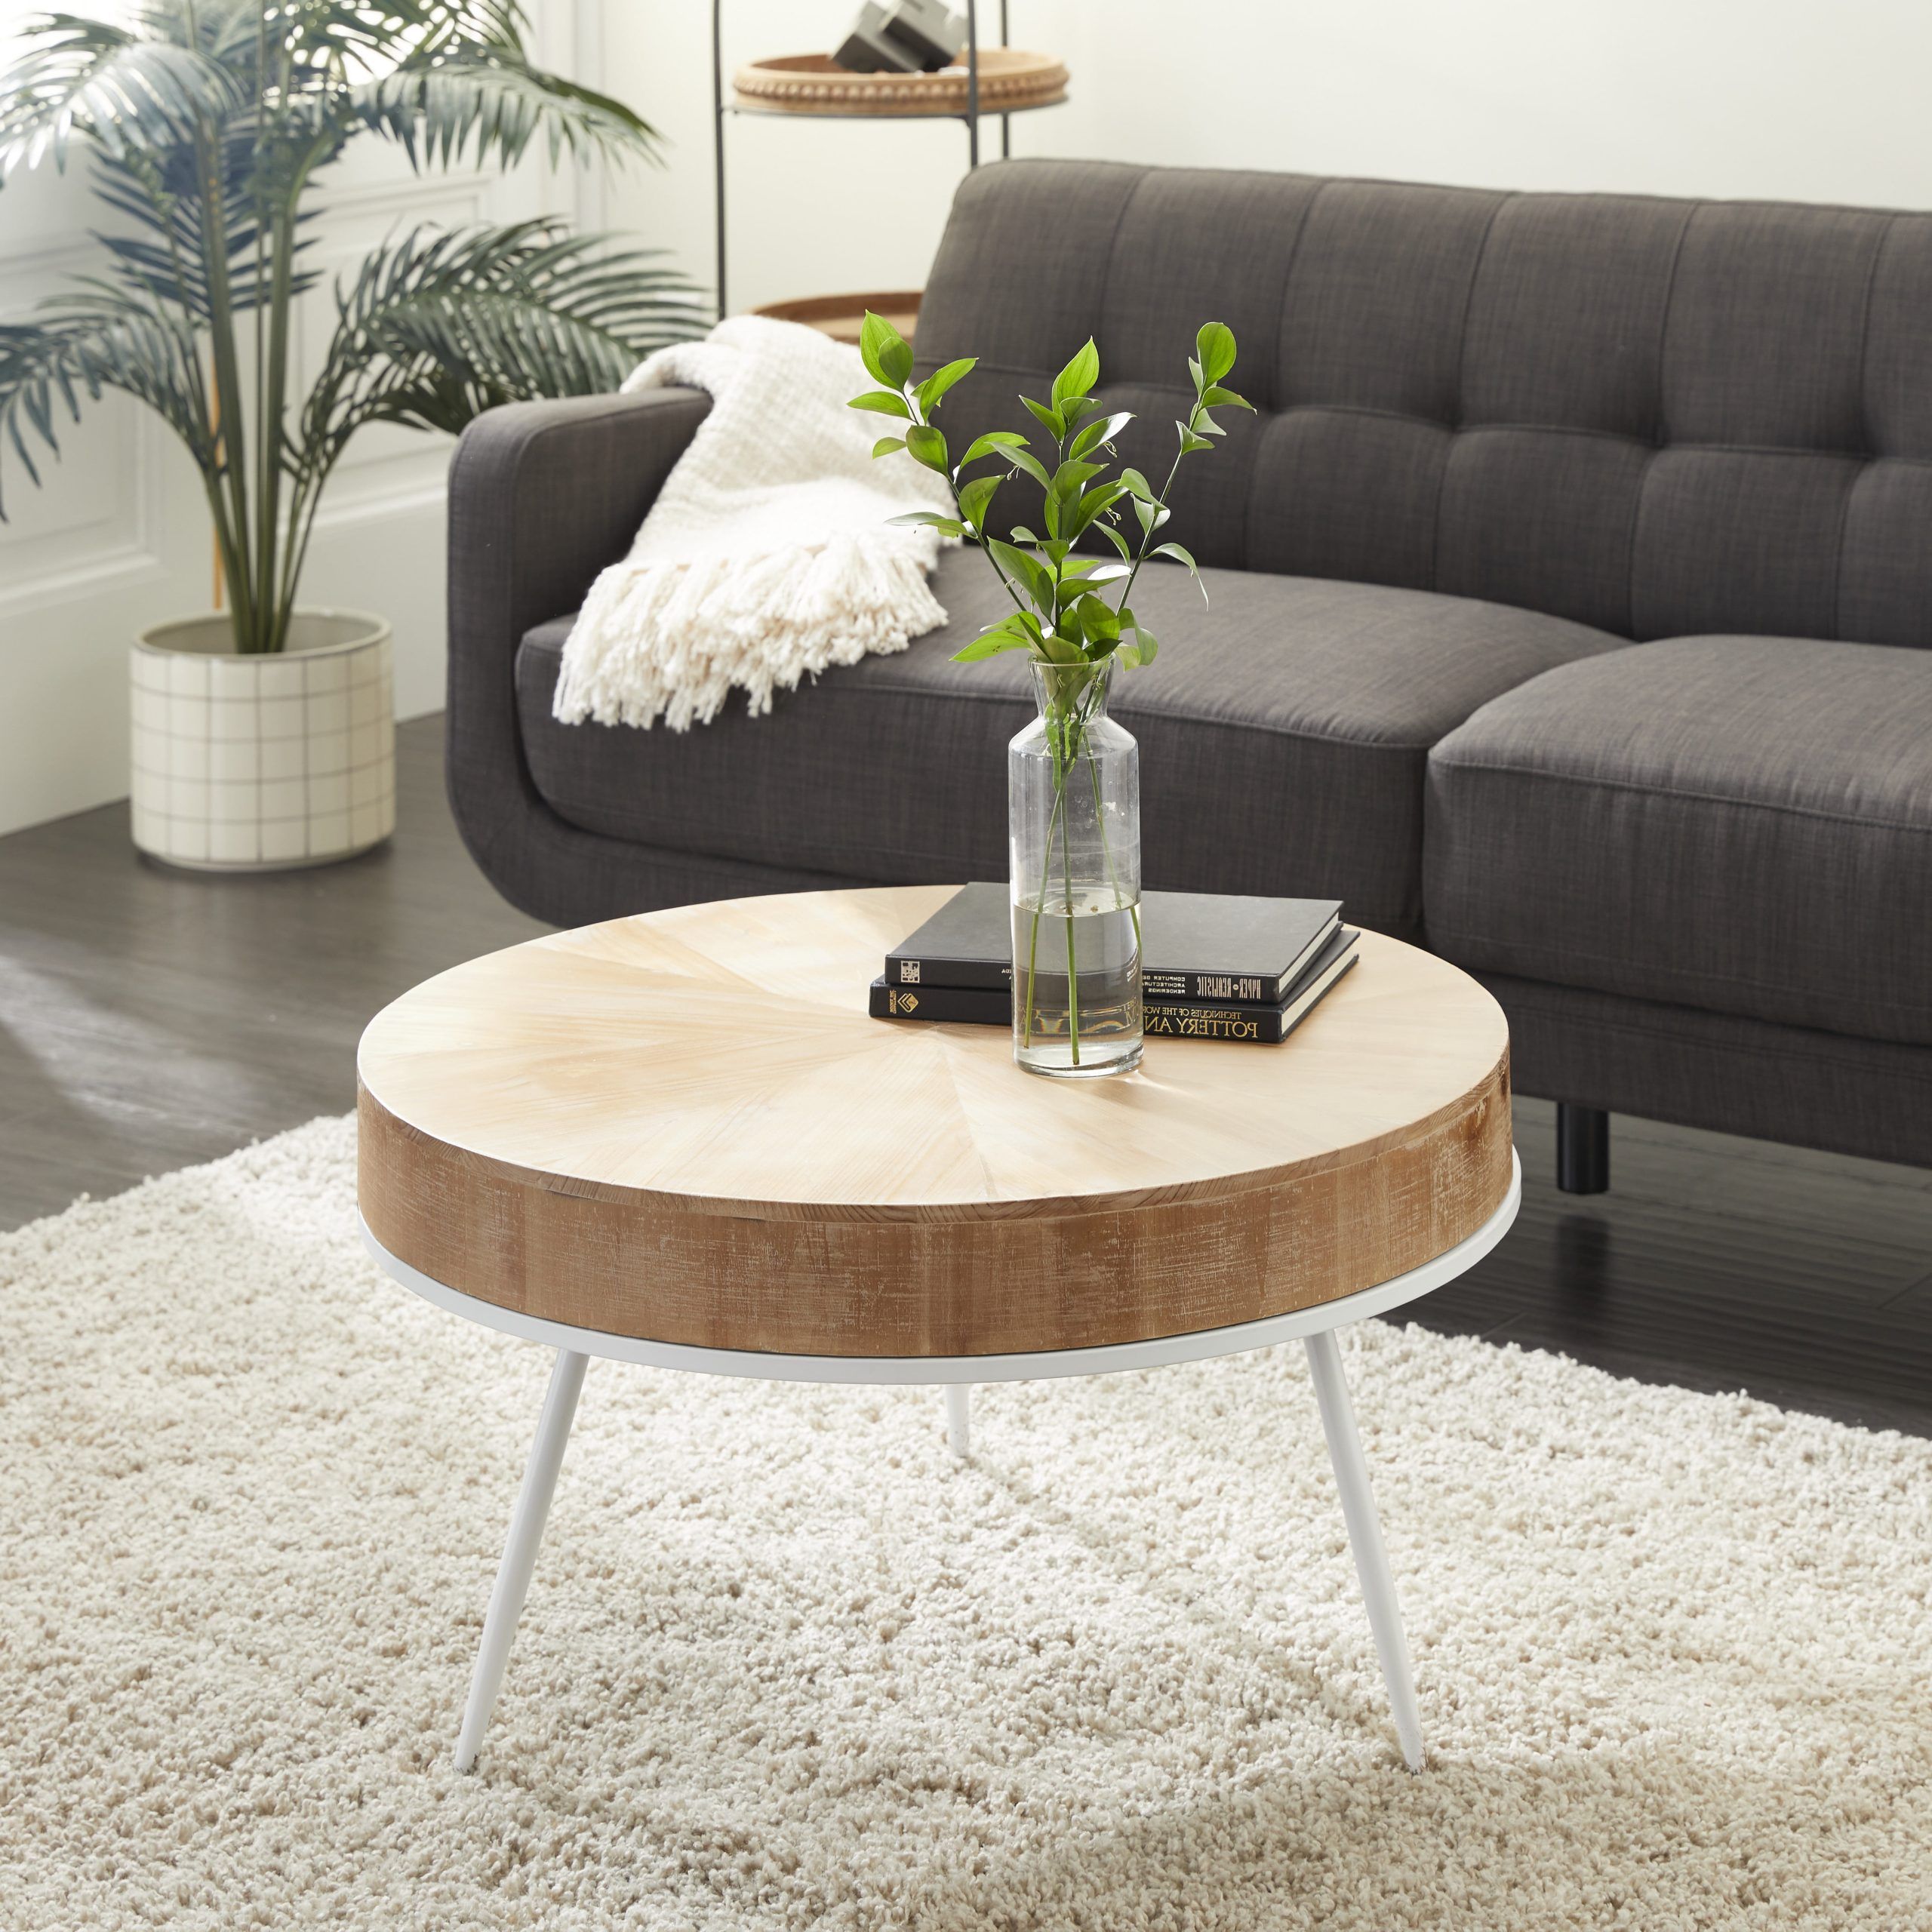 Decmode Round Natural Wood Top Coffee Table With Distressed White Metal Inside White T Base Seminar Coffee Tables (View 6 of 20)